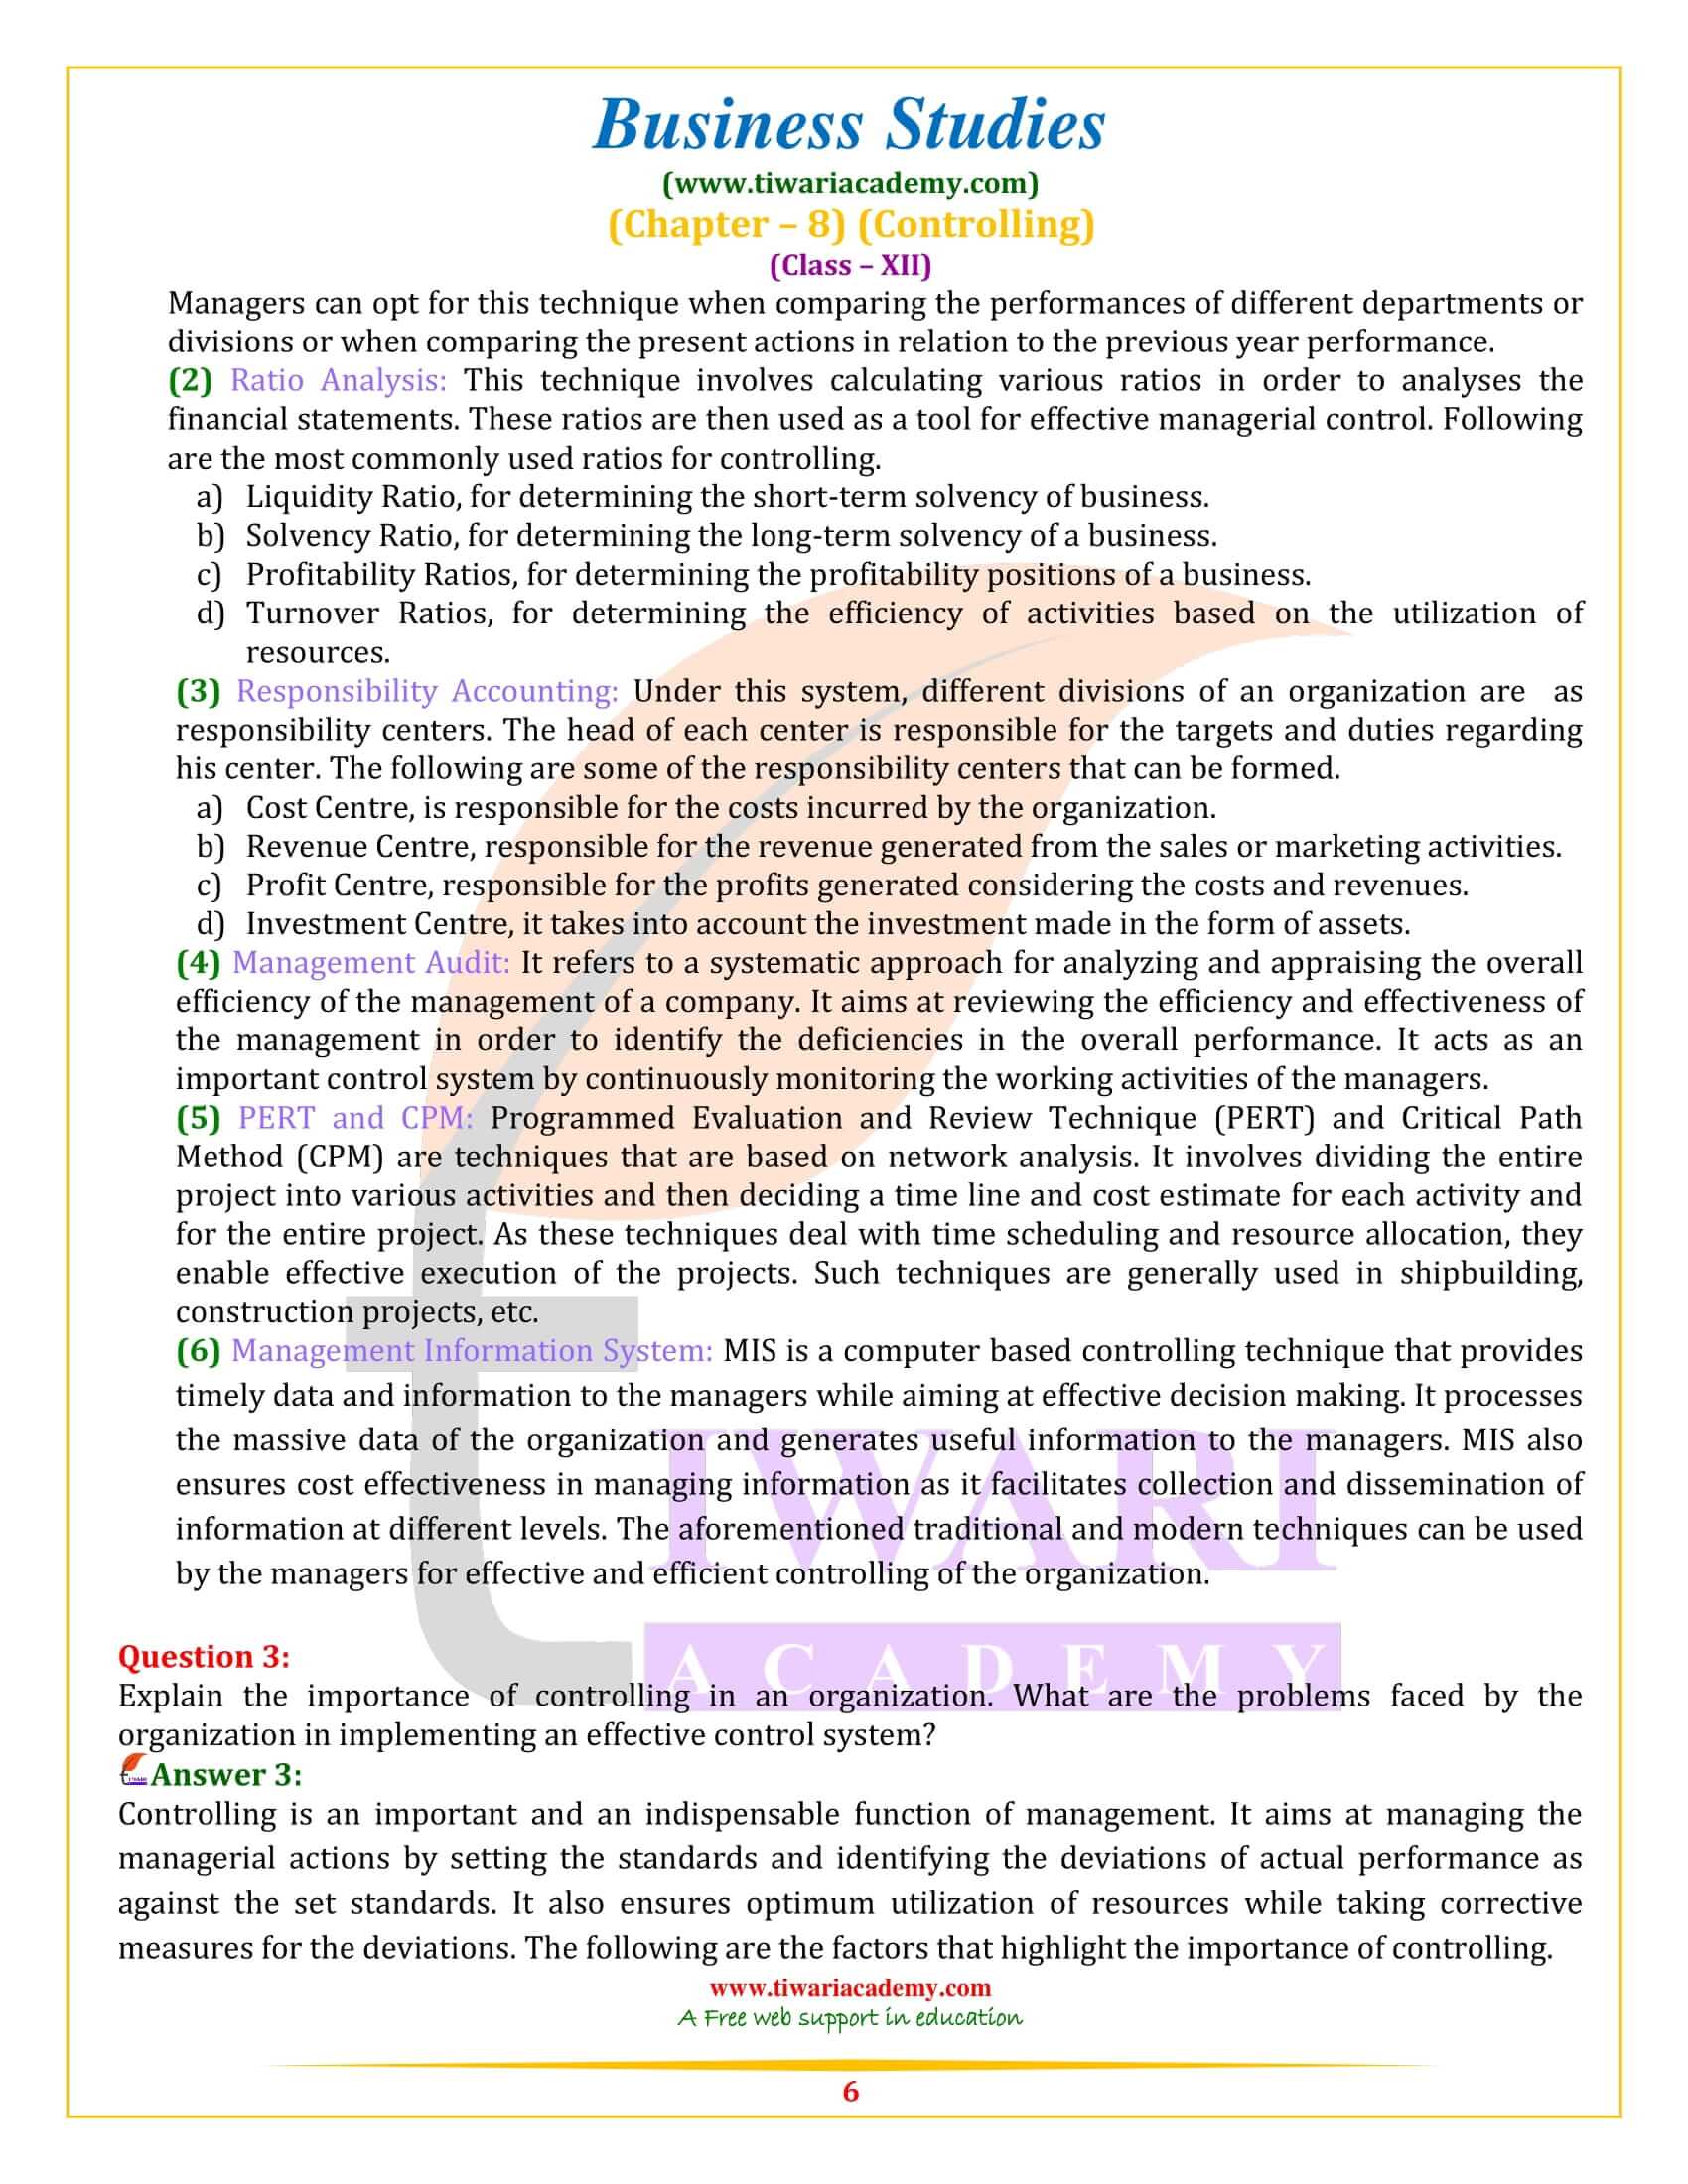 NCERT Solutions for Class 12 Business Studies Chapter 8 updated